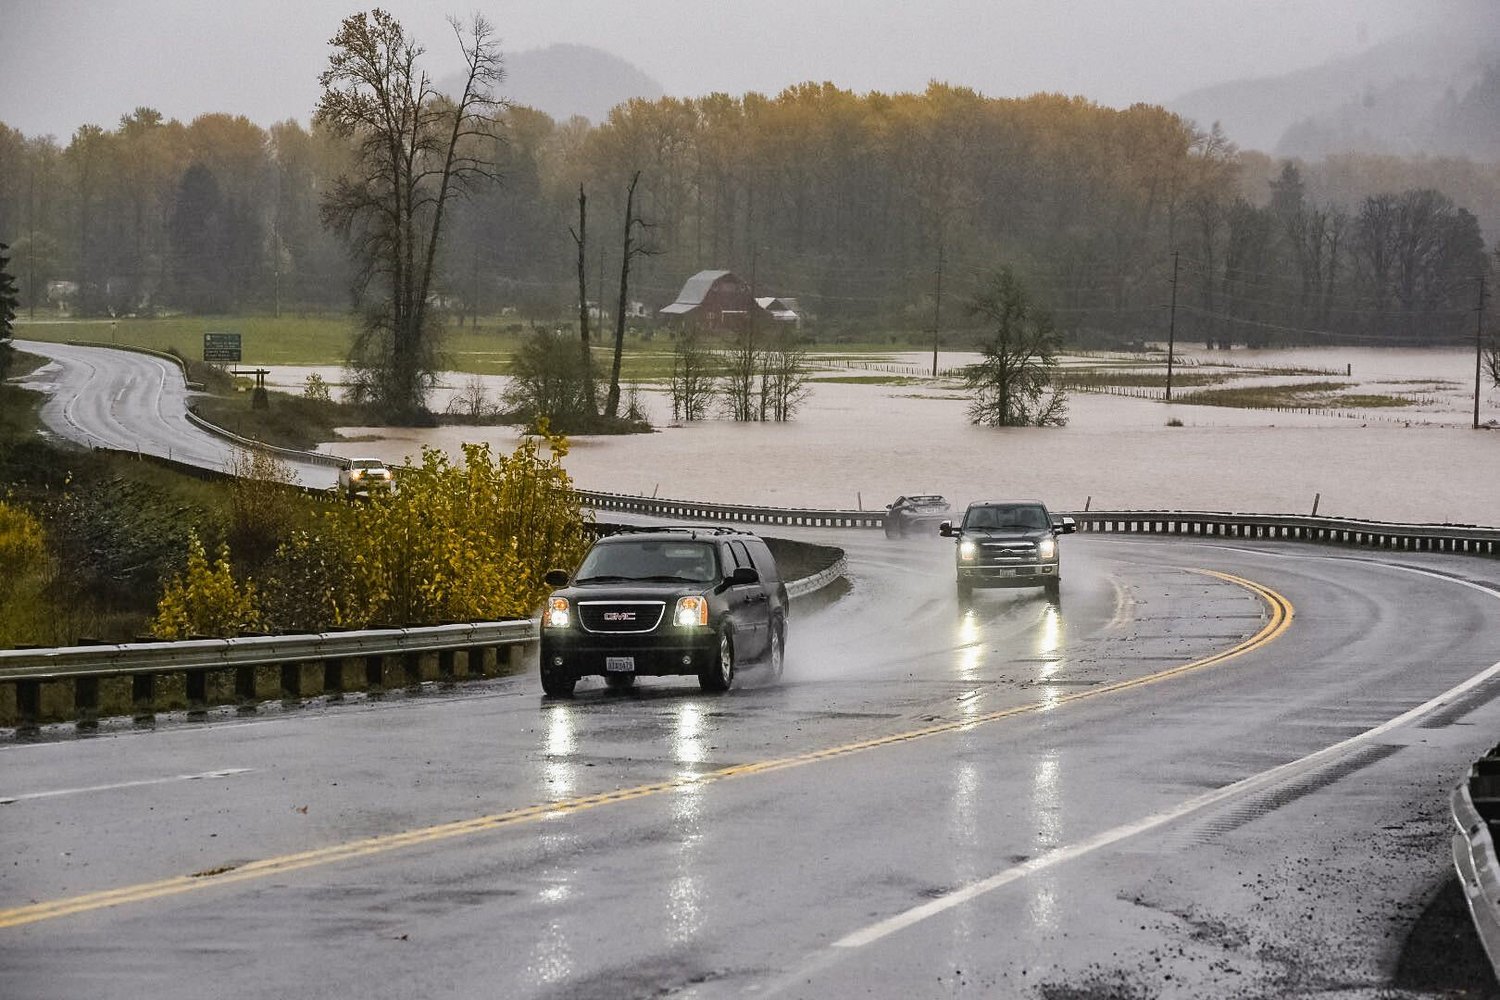 Vehicles drive on Highway 12 in Randle as floodwaters flow from the Cowlitz River along nearby fields.